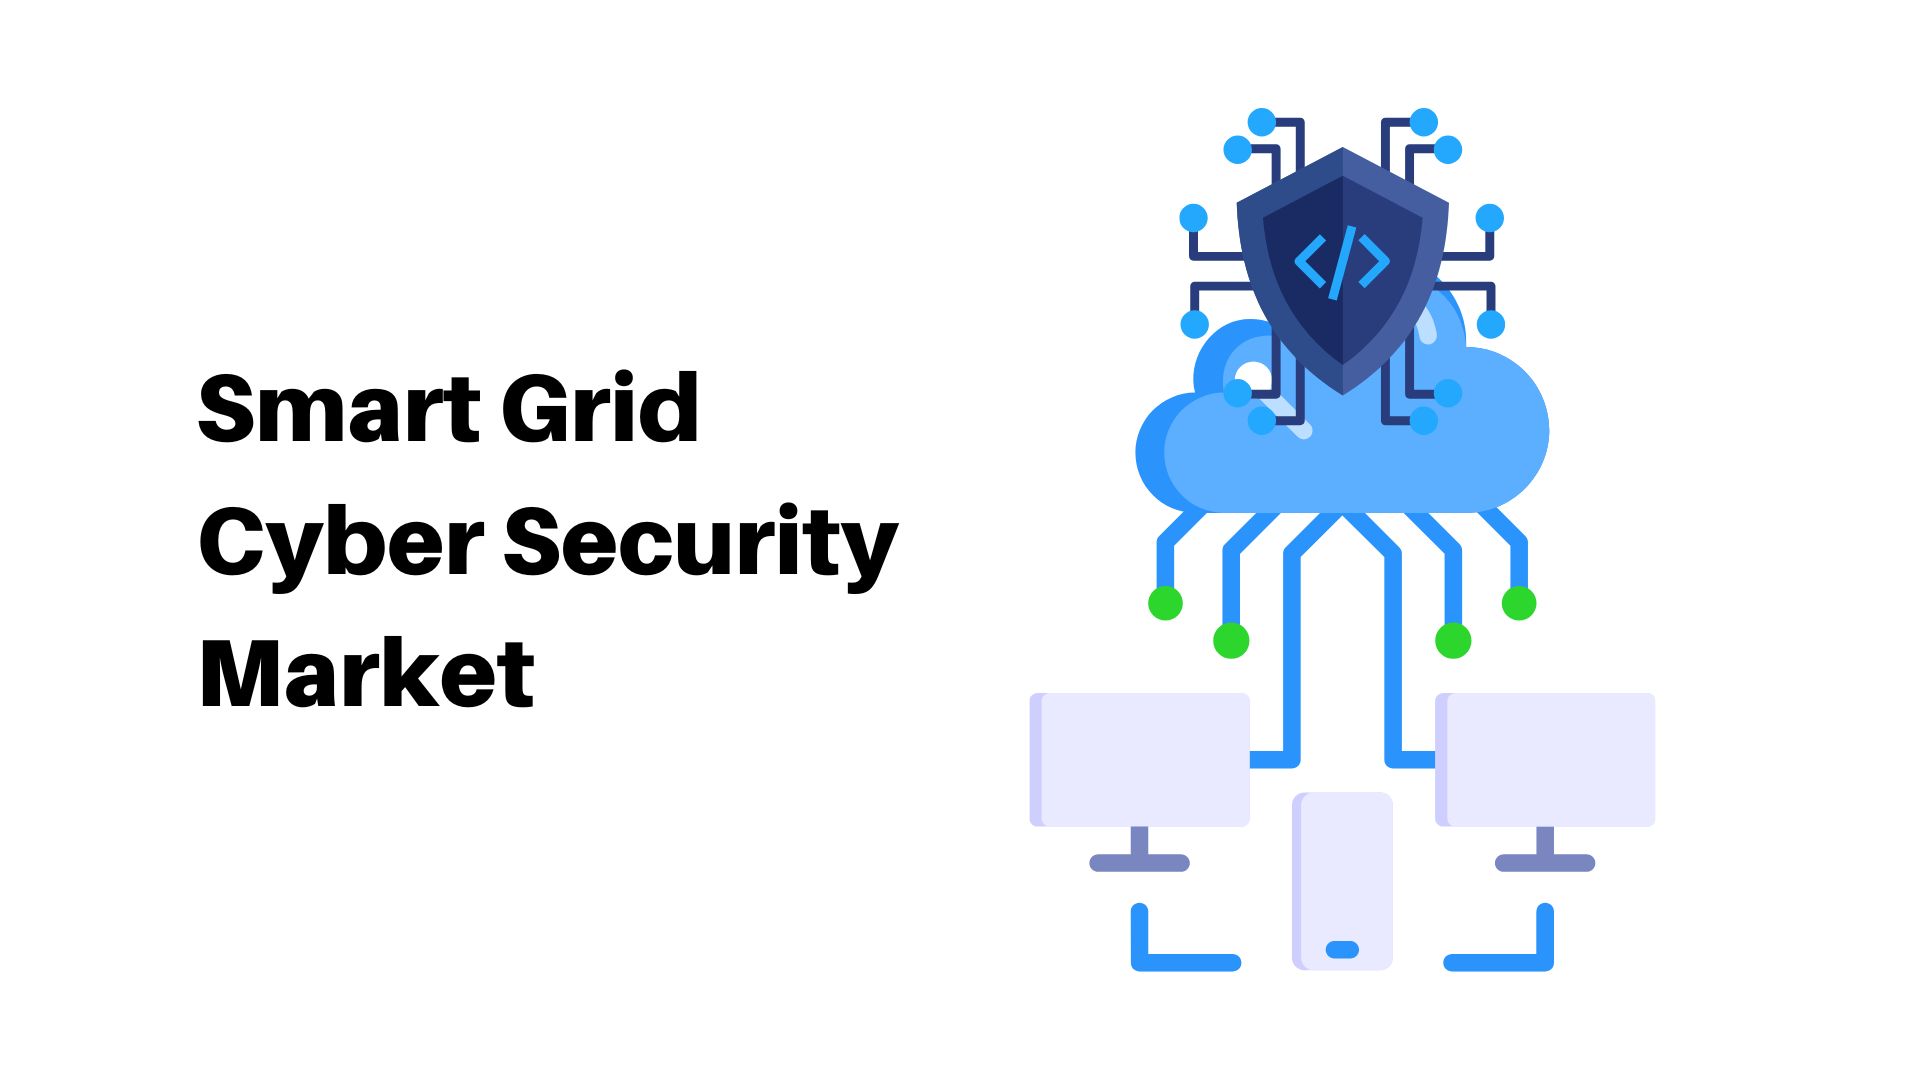 Global Smart Grid Cyber Security Market Projected To Reach USD 23.88 Bn By 2033 | CAGR Of 12.1%.